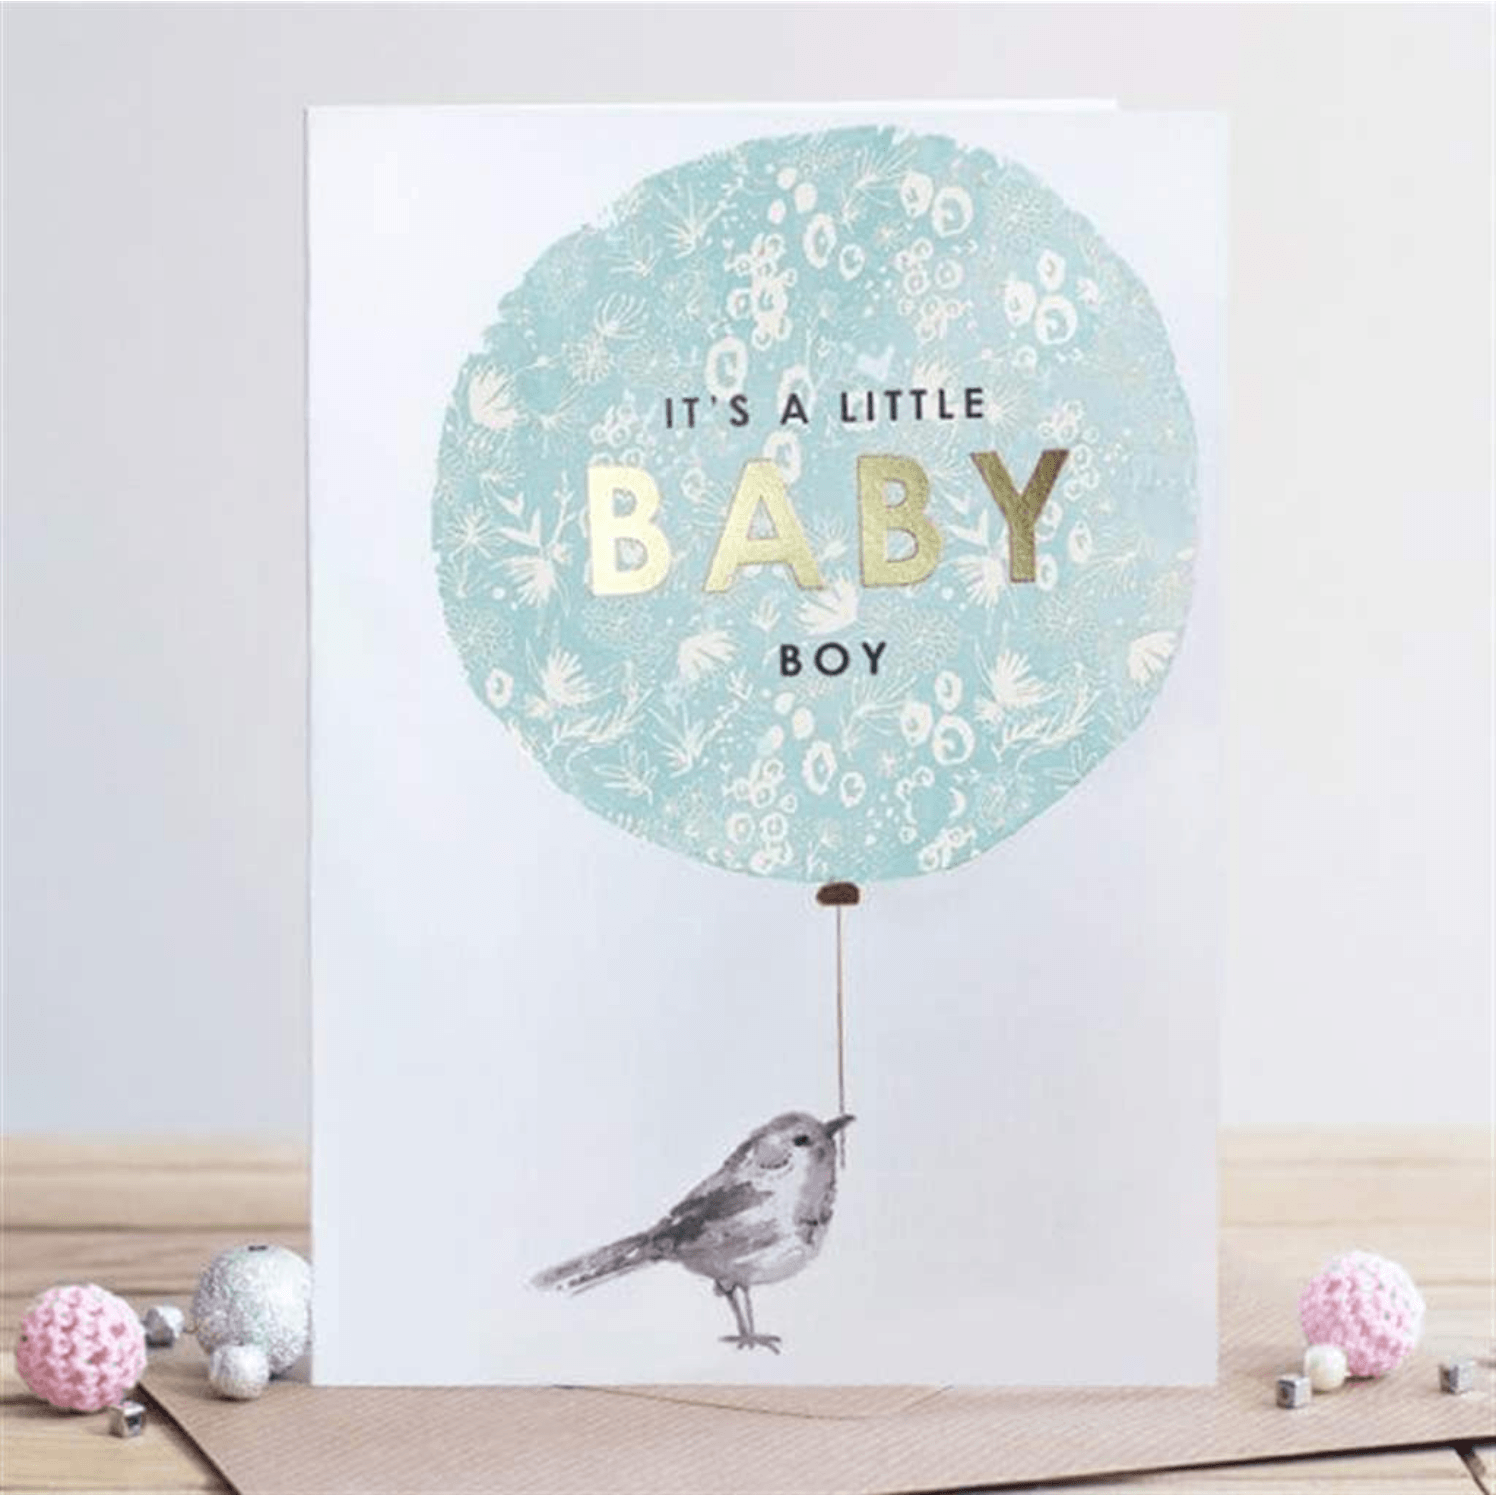 It's a Little Baby Boy - Greeting Card - Baby